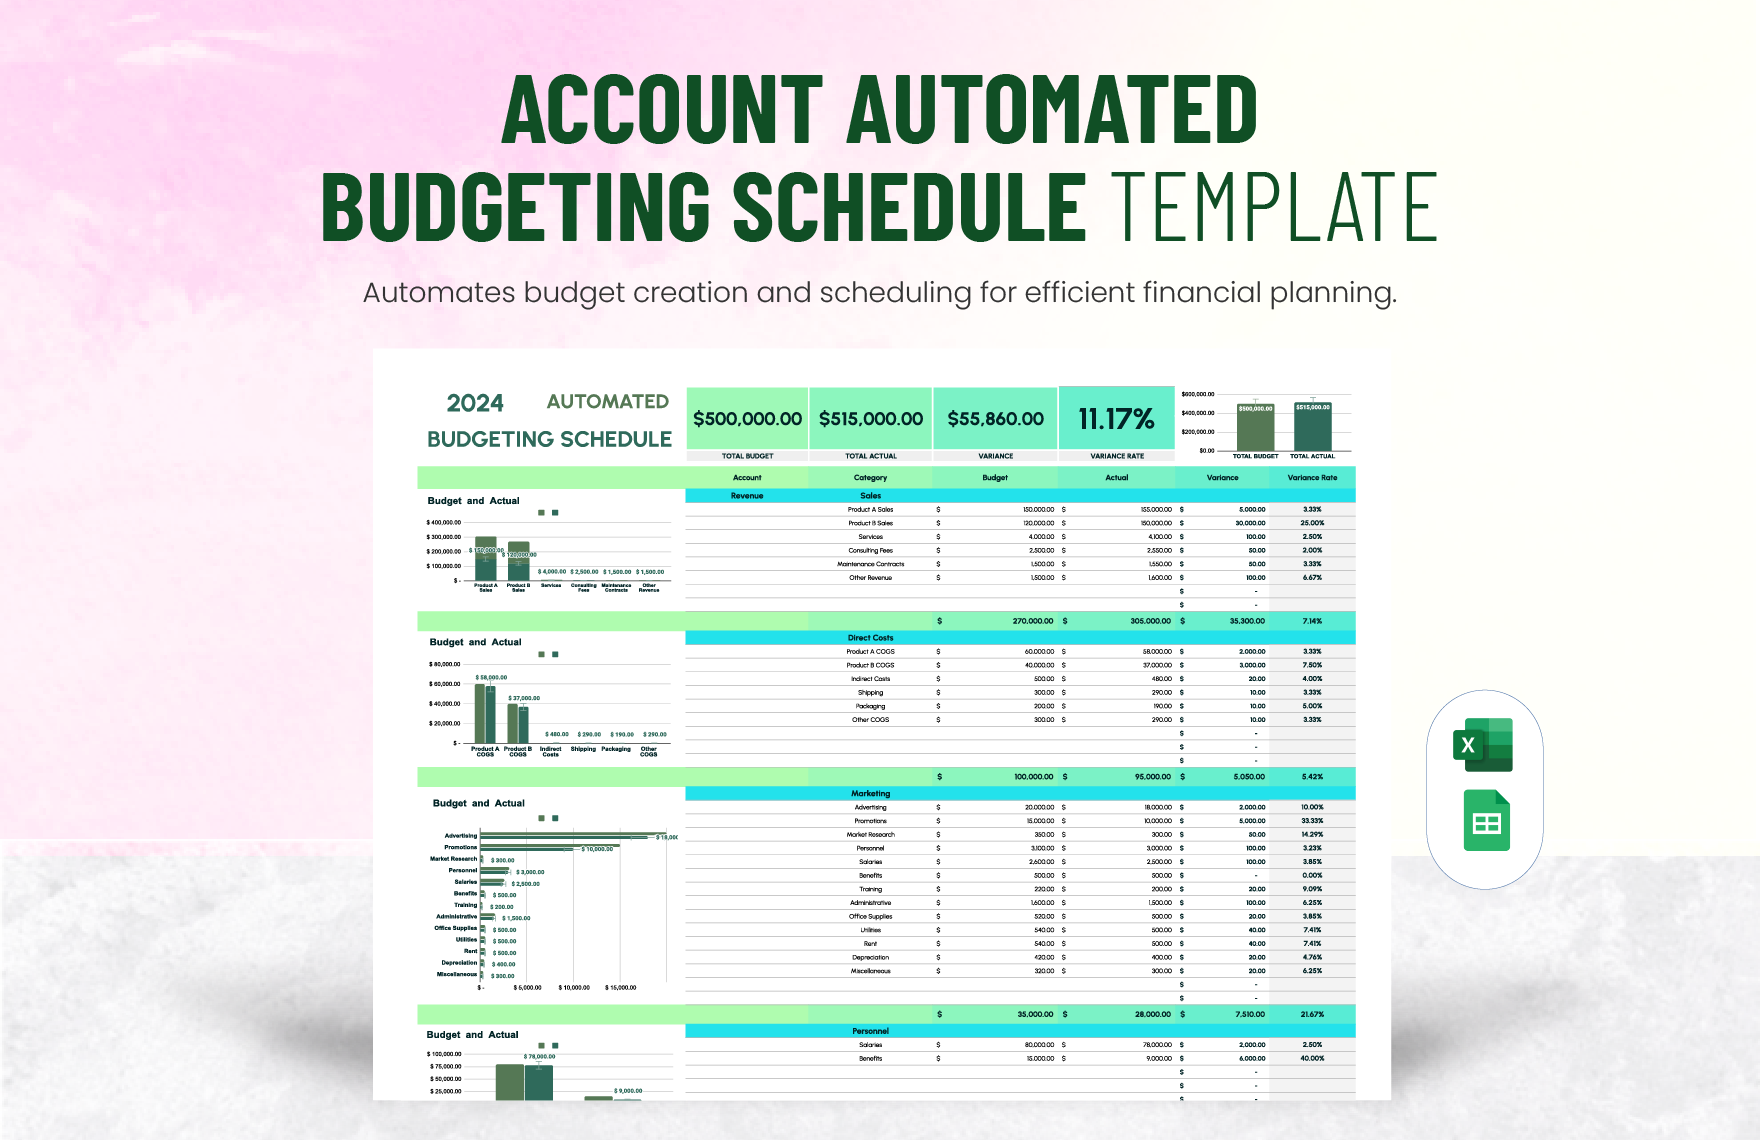 Account Automated Budgeting Schedule Template